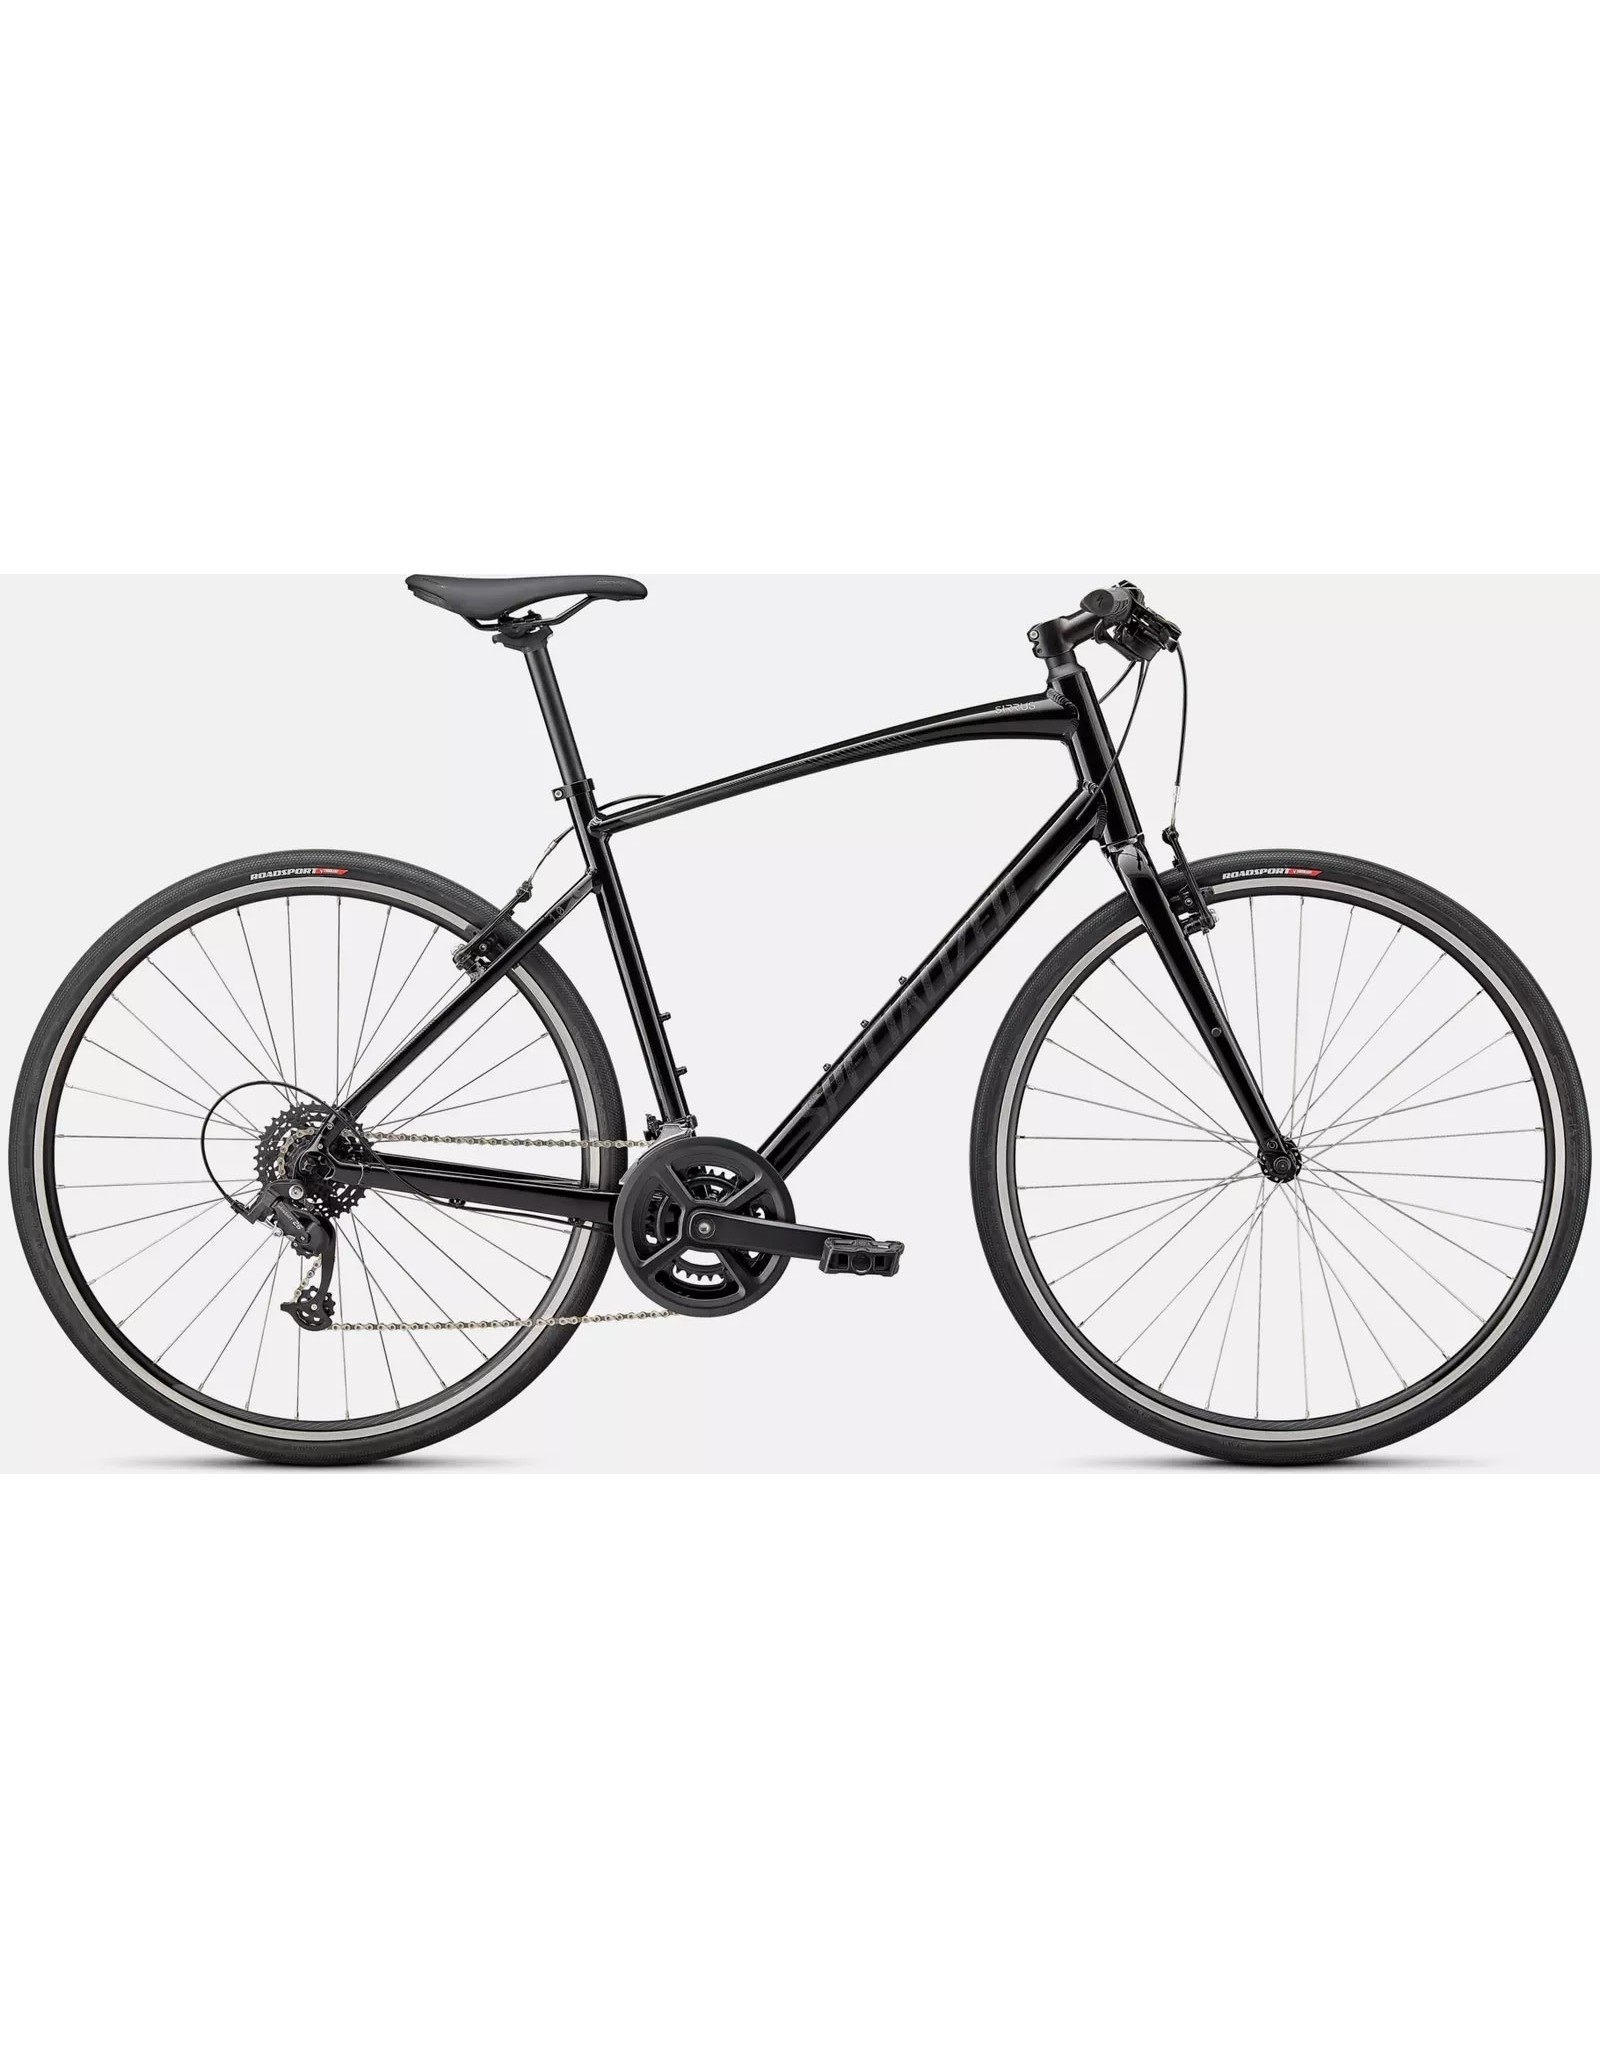 SPECIALIZED SIRRUS 1.0 - Black/Charcoal/Black Reflective XS